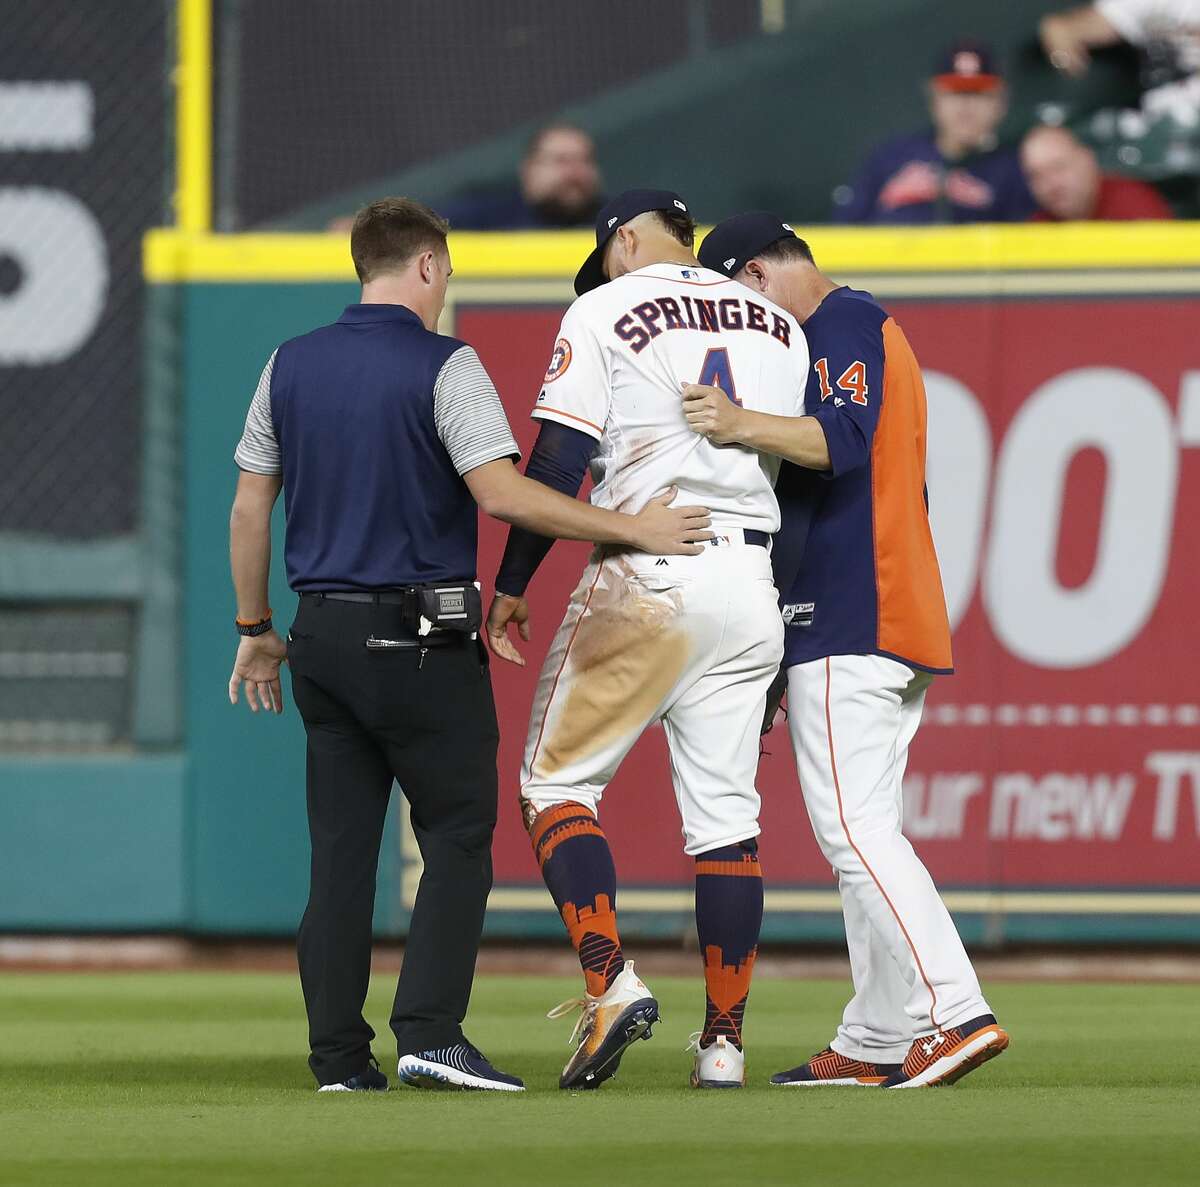 Houston Astros right fielder George Springer (4) is attended to after getting roughed up chasing Kansas City Royals Paulo Orlando's foul ball during the eighth inning of an MLB baseball game at Minute Maid Park, Saturday, April 8, 2017, in Houston. ( Karen Warren / Houston Chronicle )